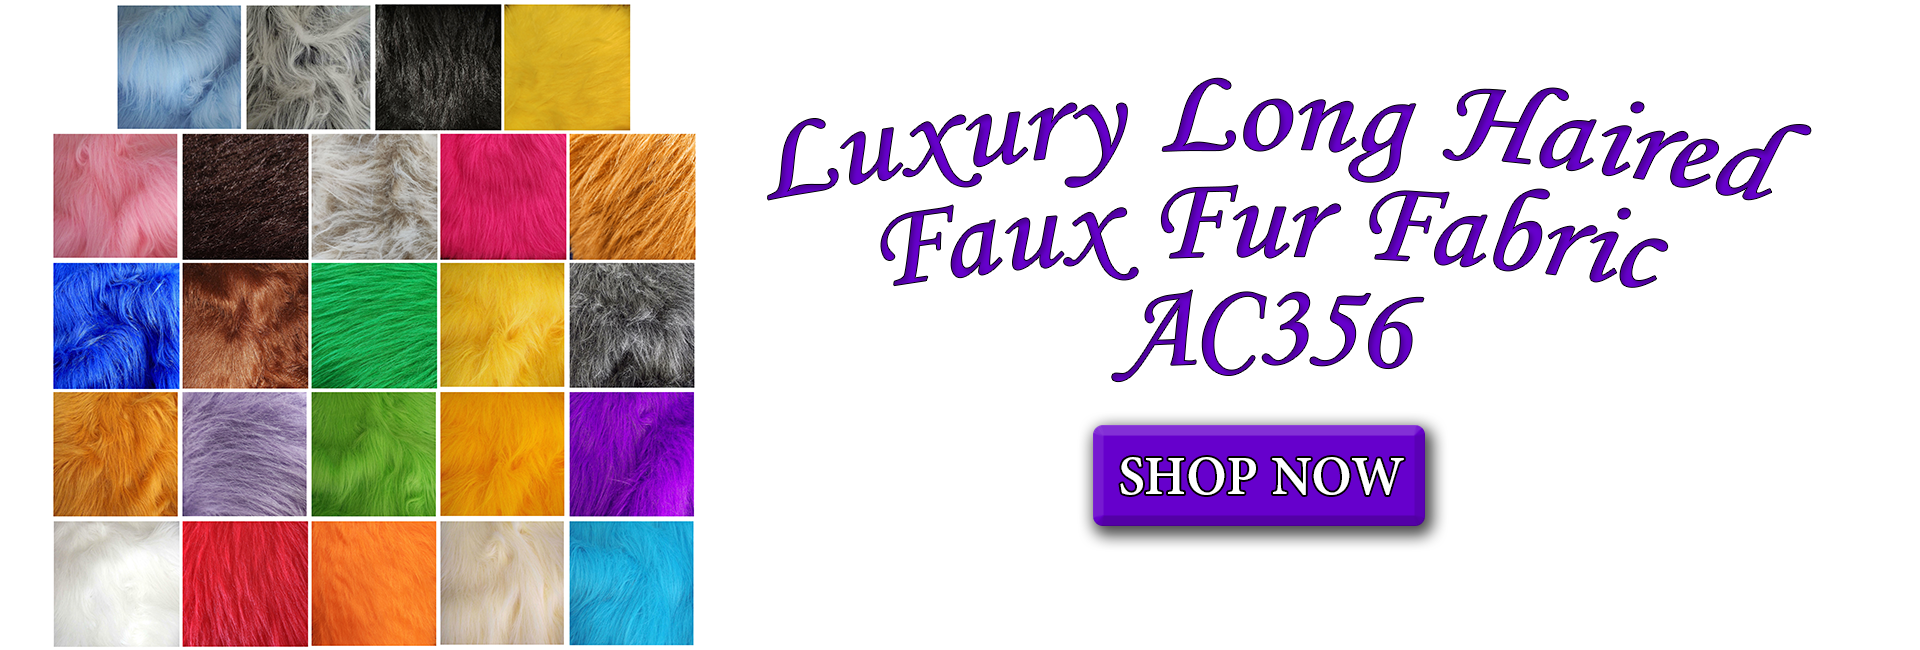 Low Price Chesnut Brown Longhaired Faux Fur - AC356-Chestnut